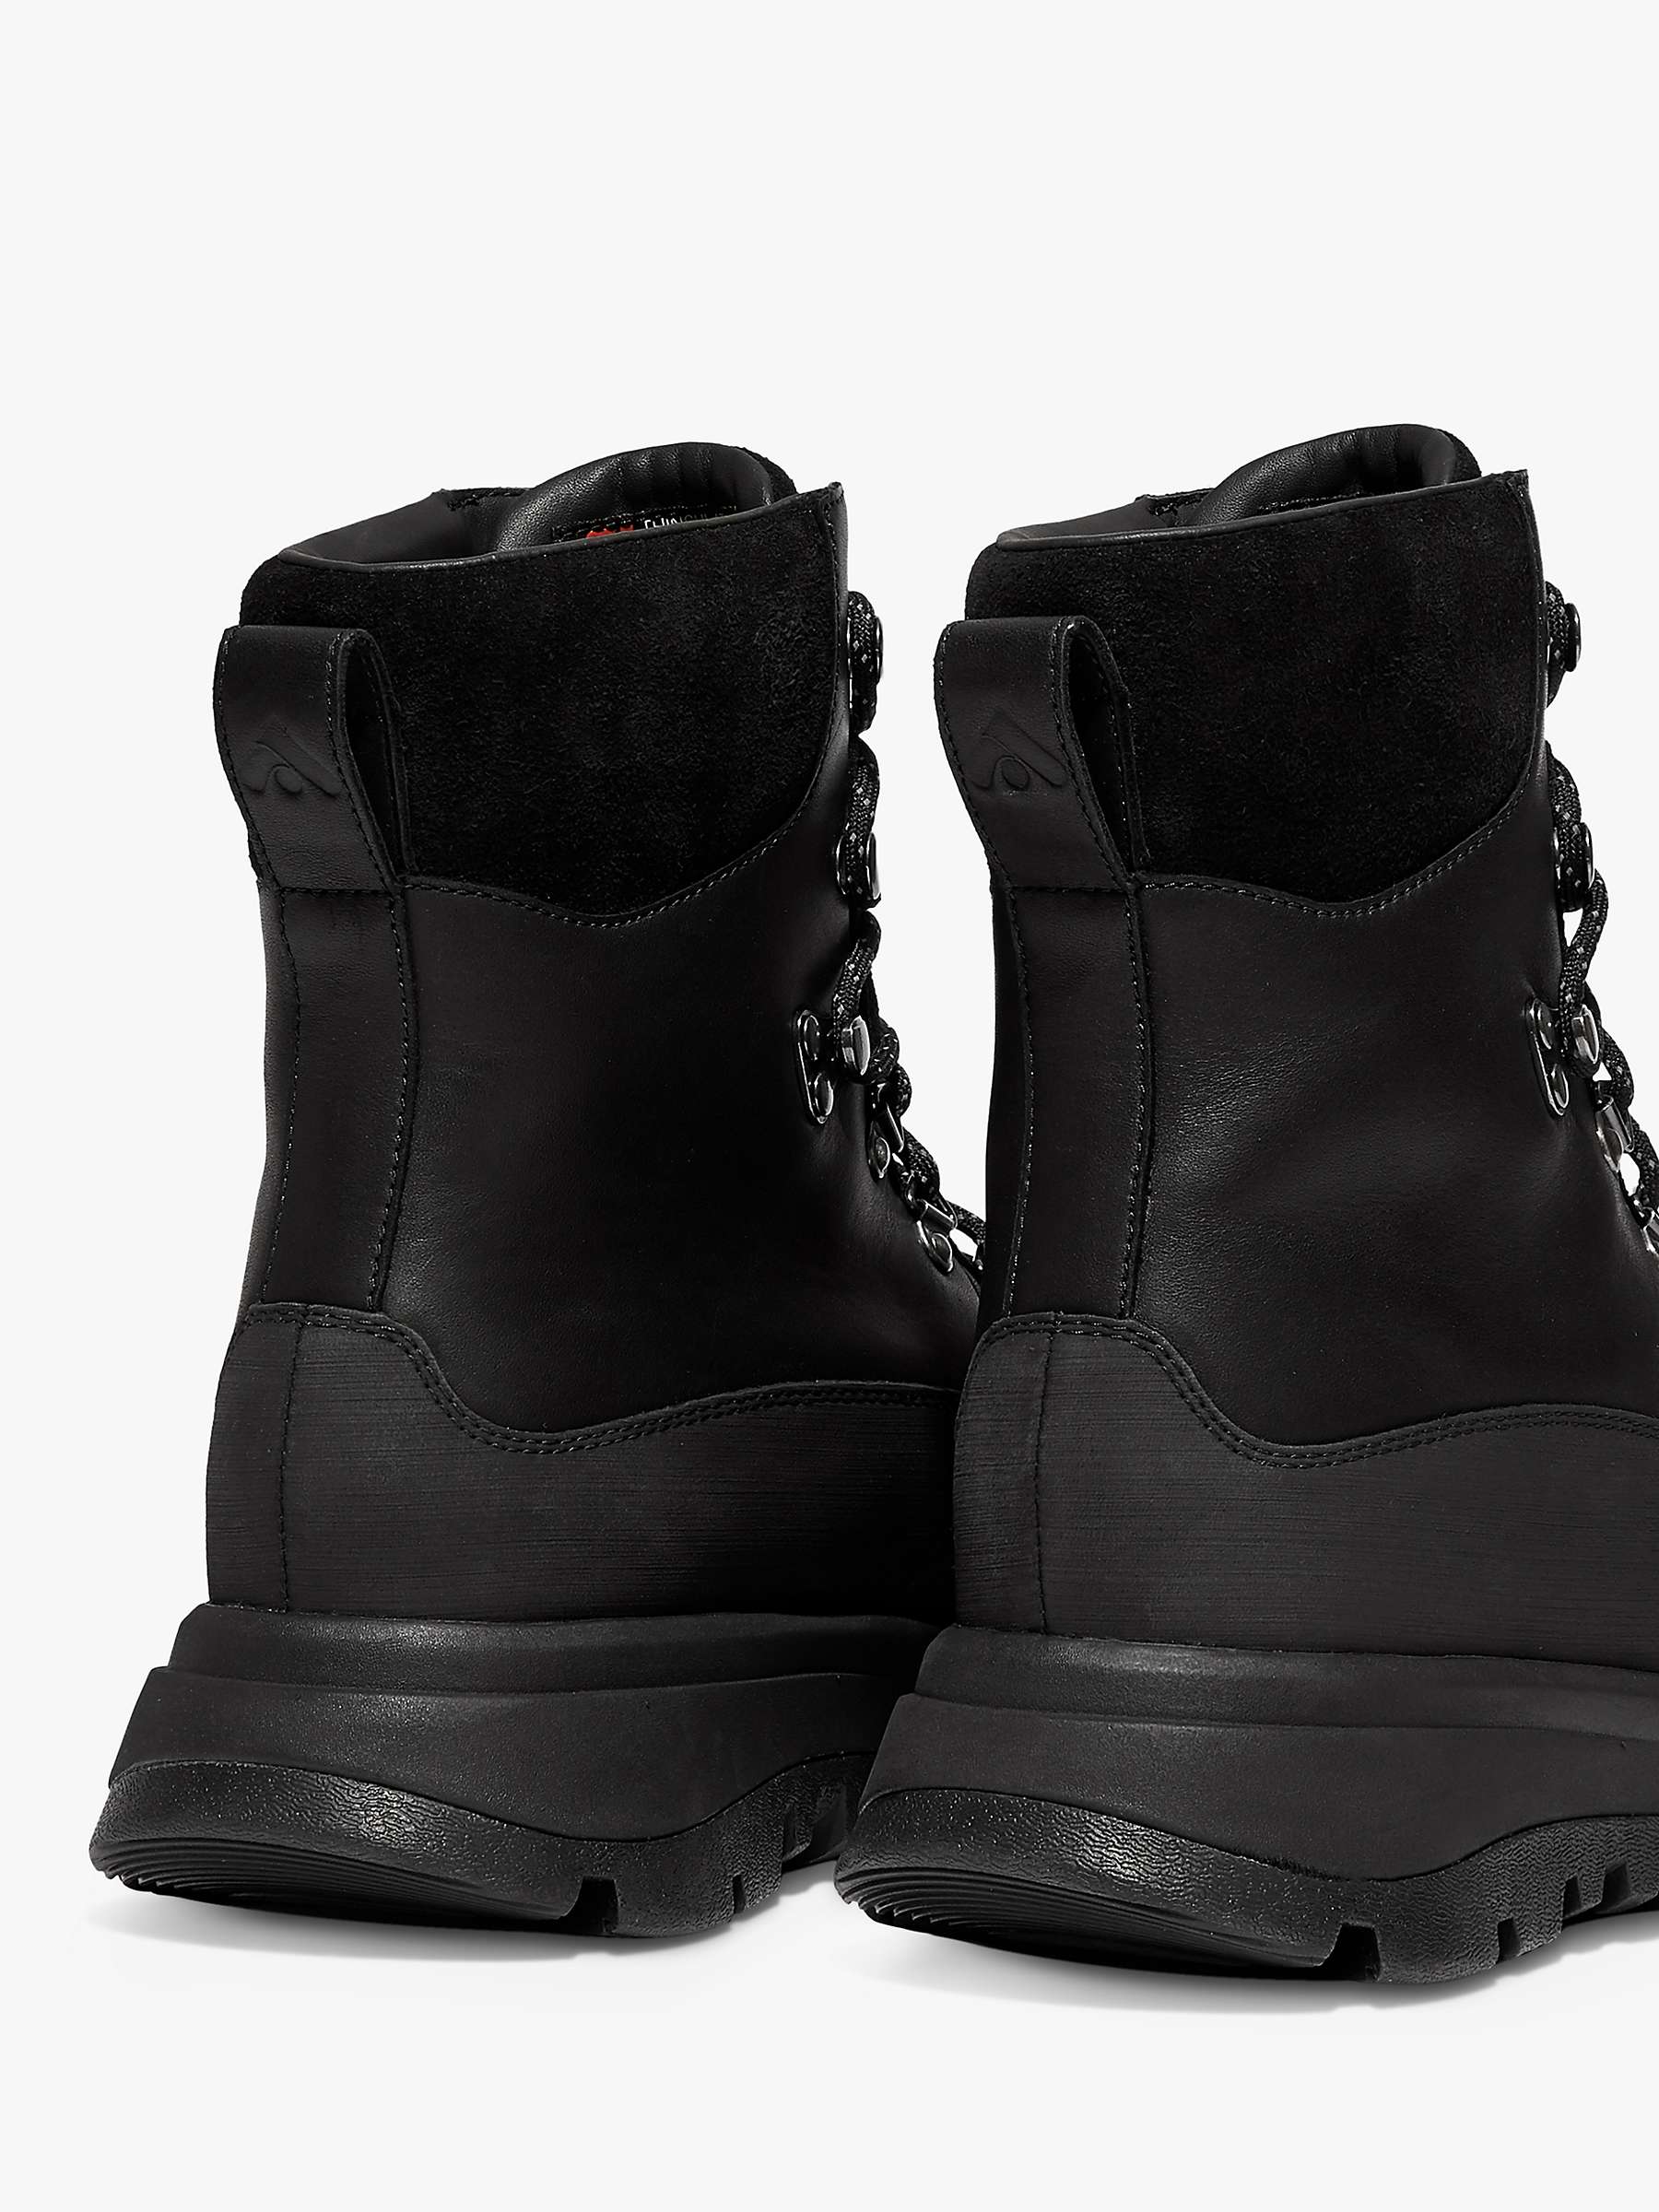 Buy FitFlop Neo-D-Hyker Leather Blend Walking Boots Online at johnlewis.com